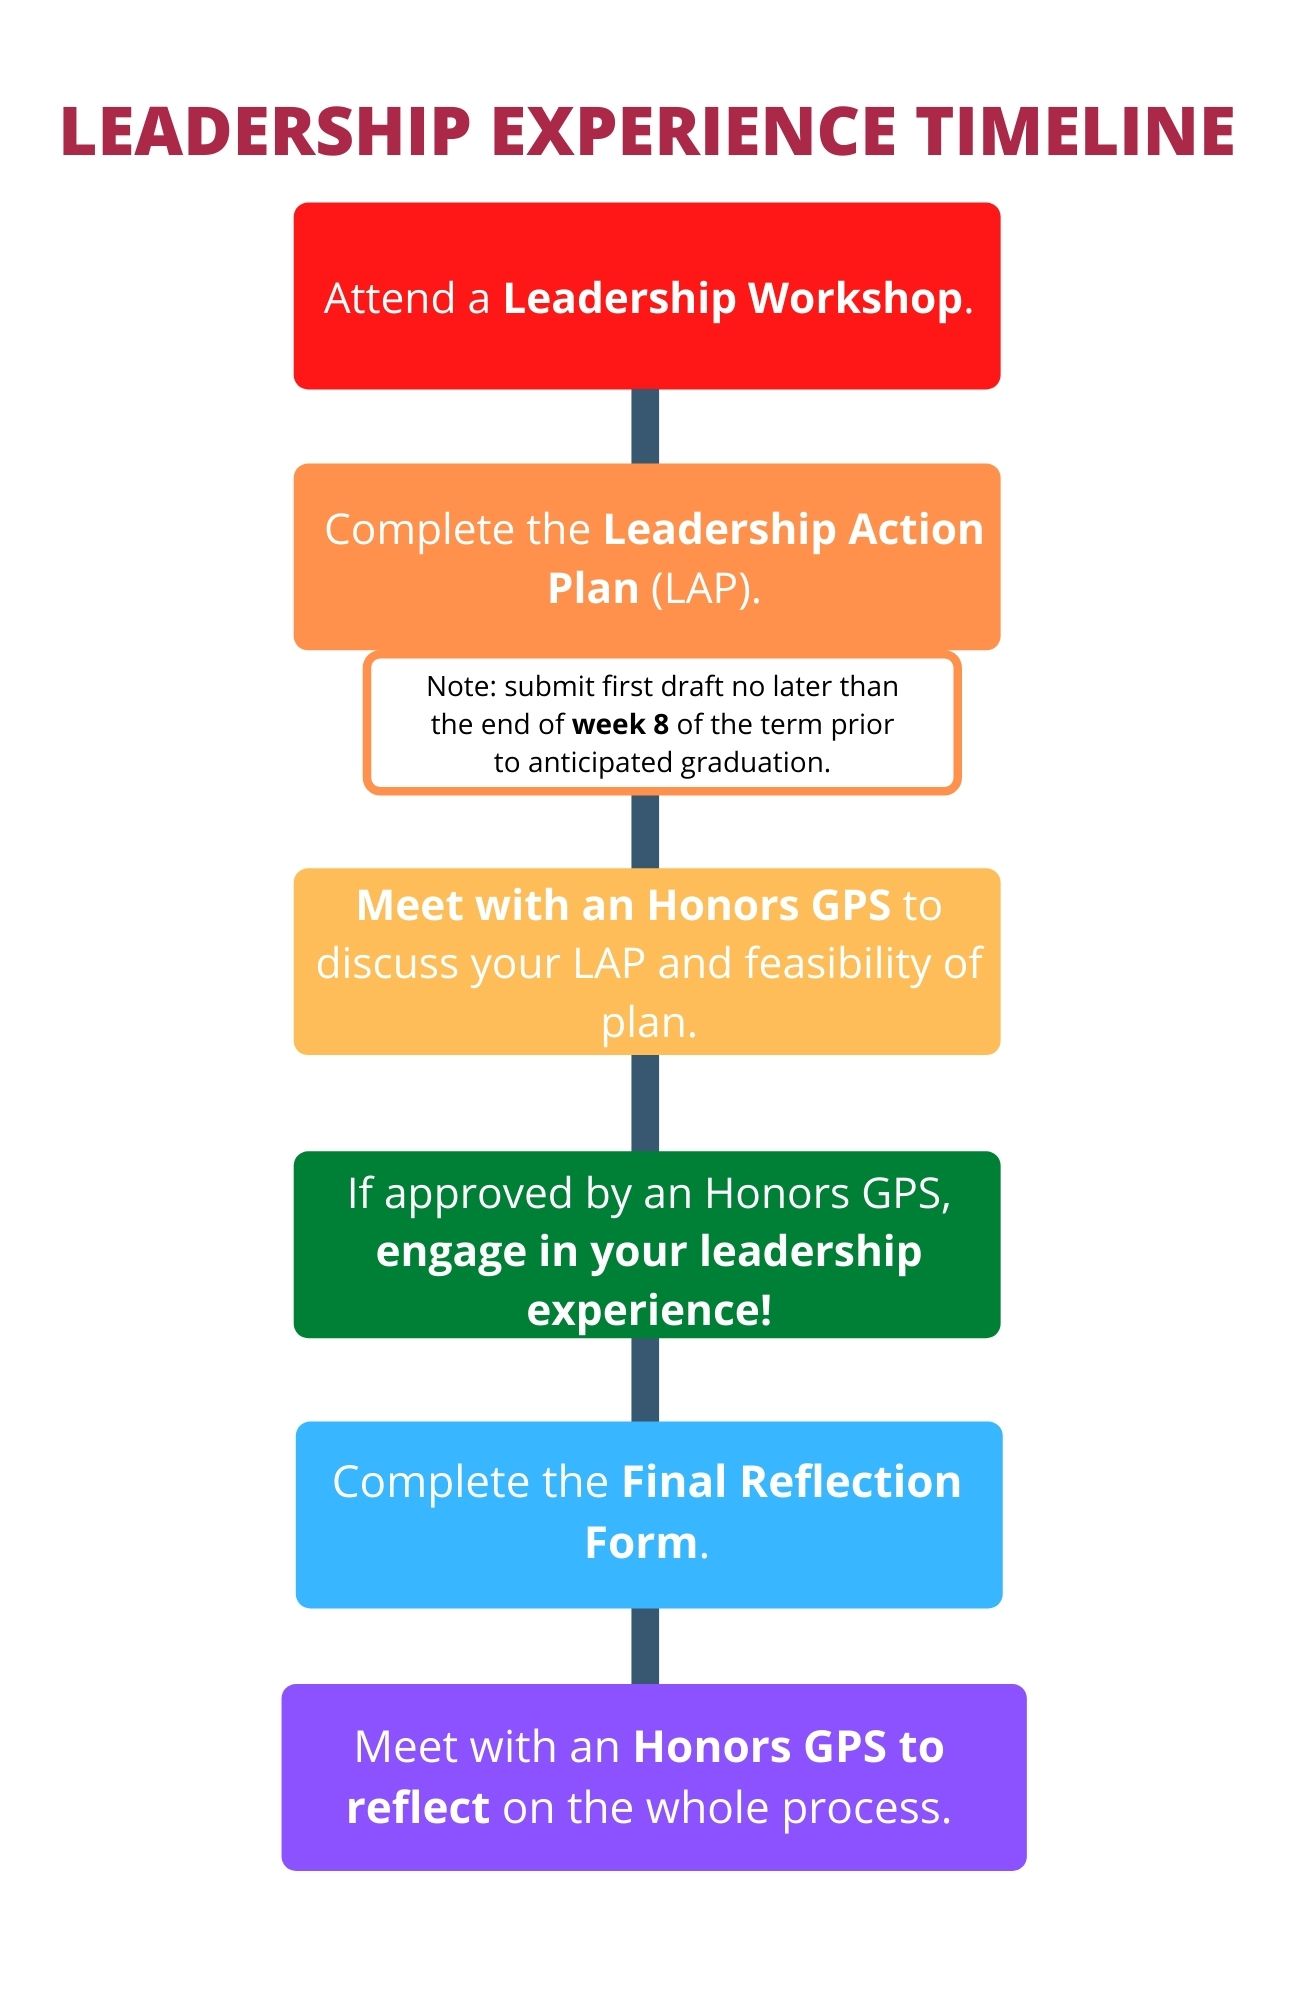 Leadership Experience Timeline. All information is also in the text.